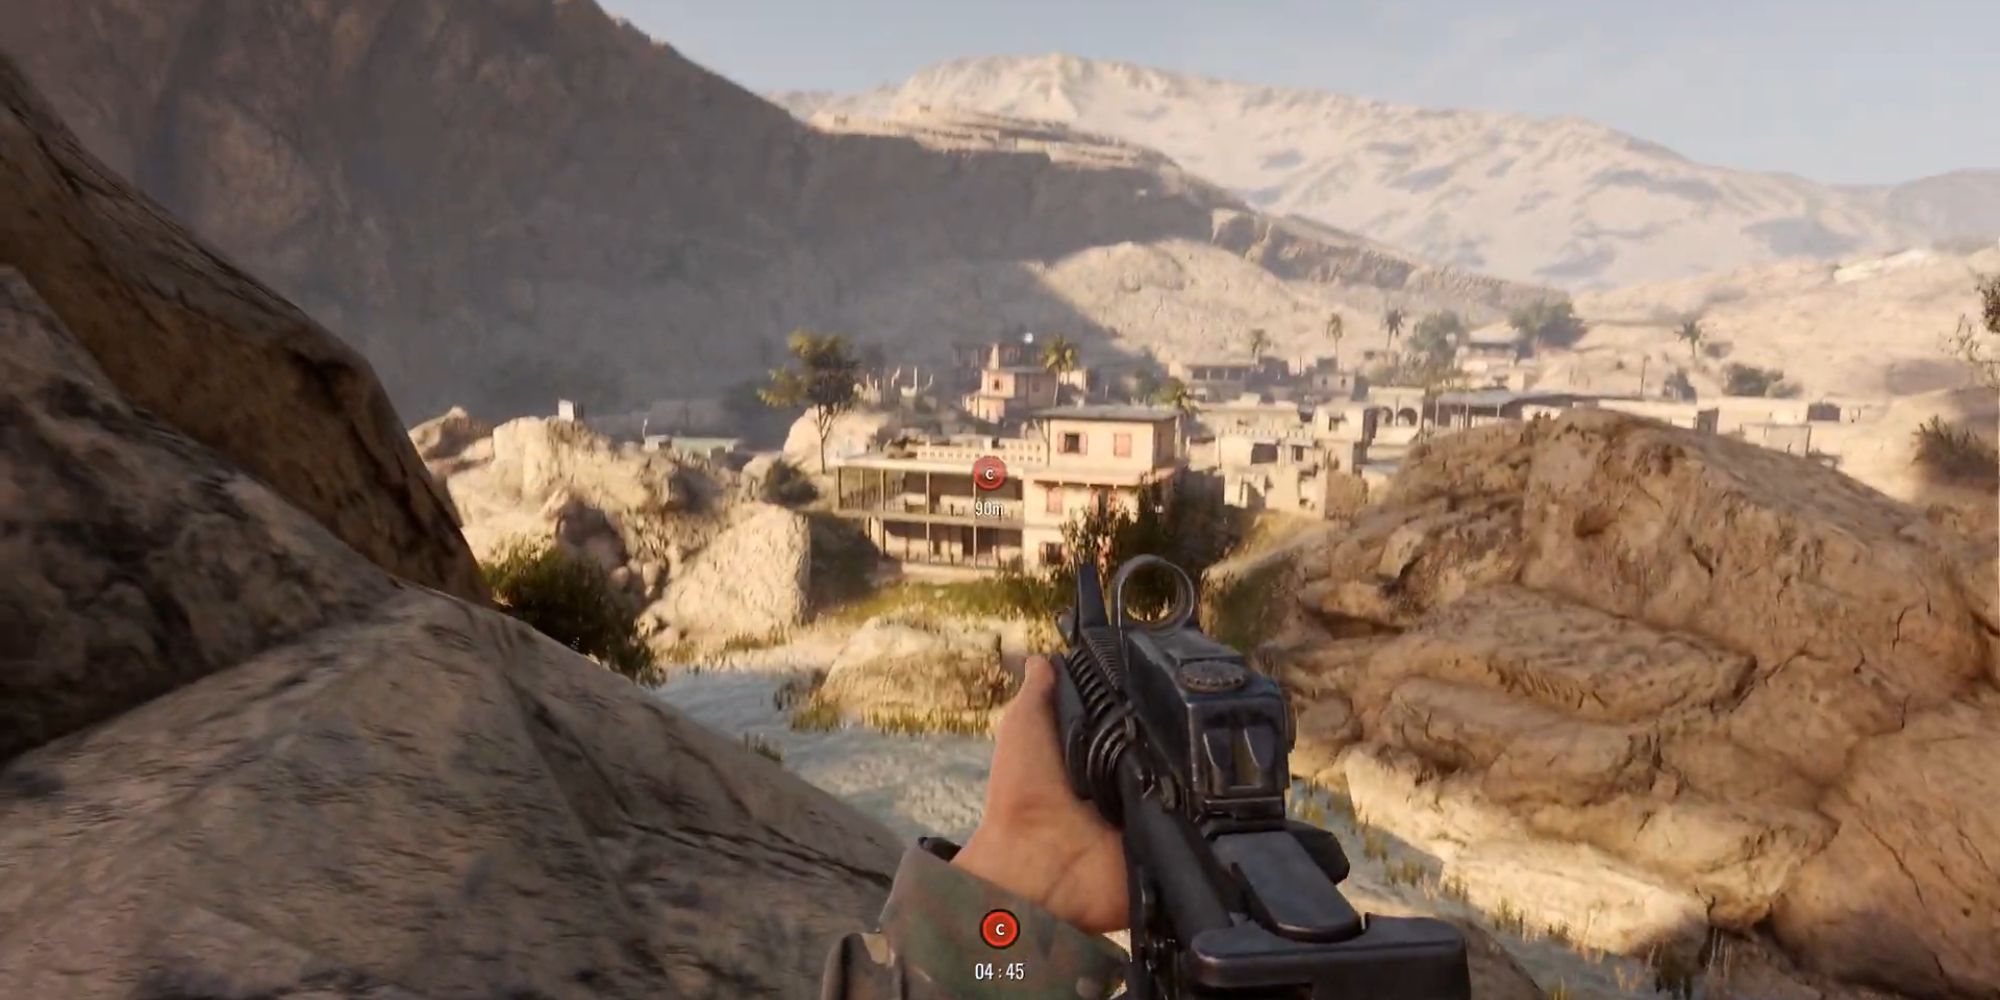 Insurgency Sandstorm Maps a first person perspective of a rifle looking out across a small town against multiple mountains in the distance